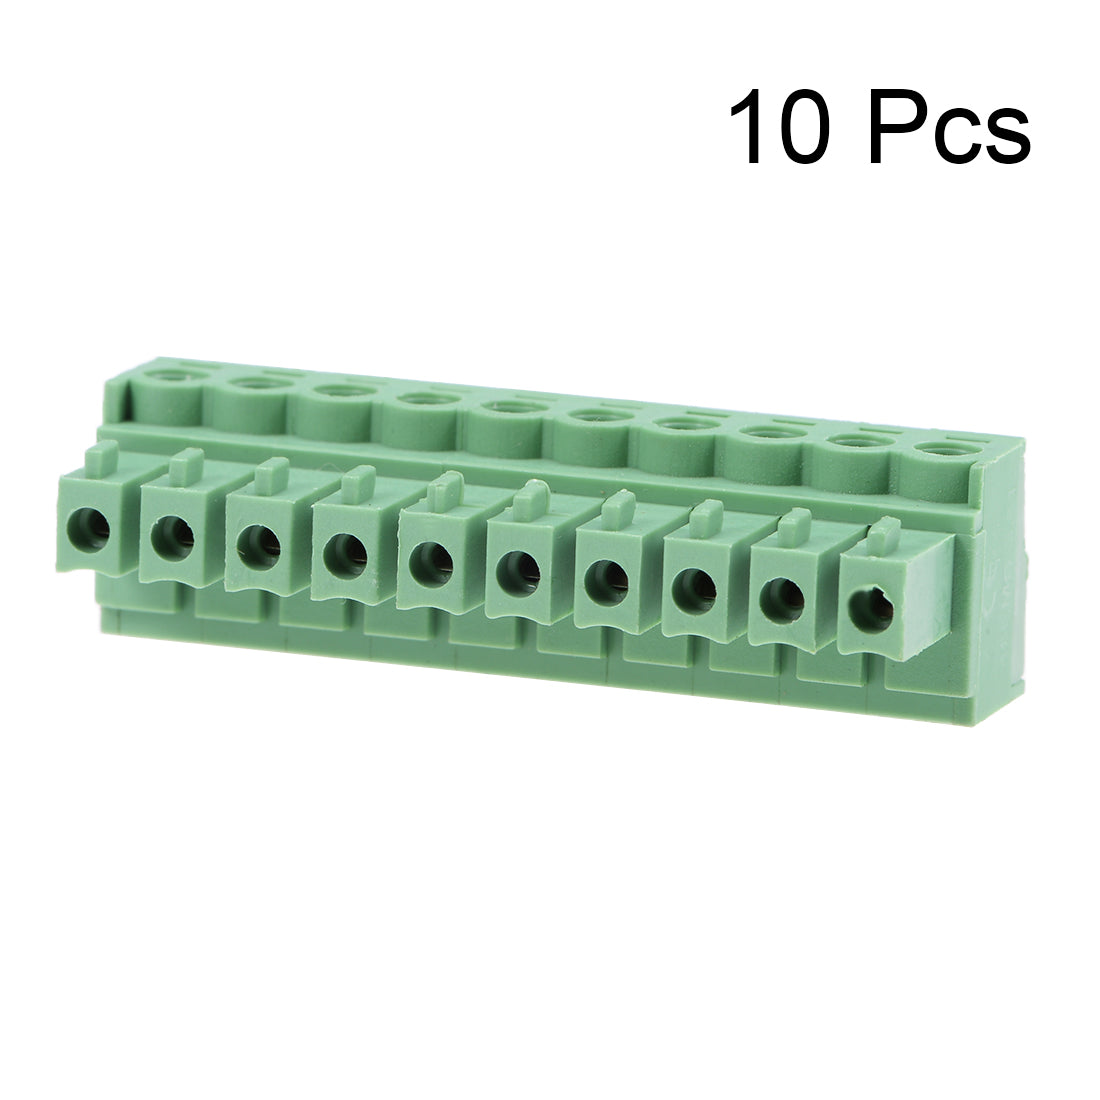 uxcell Uxcell 10Pcs AC300V 10A 3.81mm Pitch 10P Needle Seat Insert-In PCB Terminal Block green